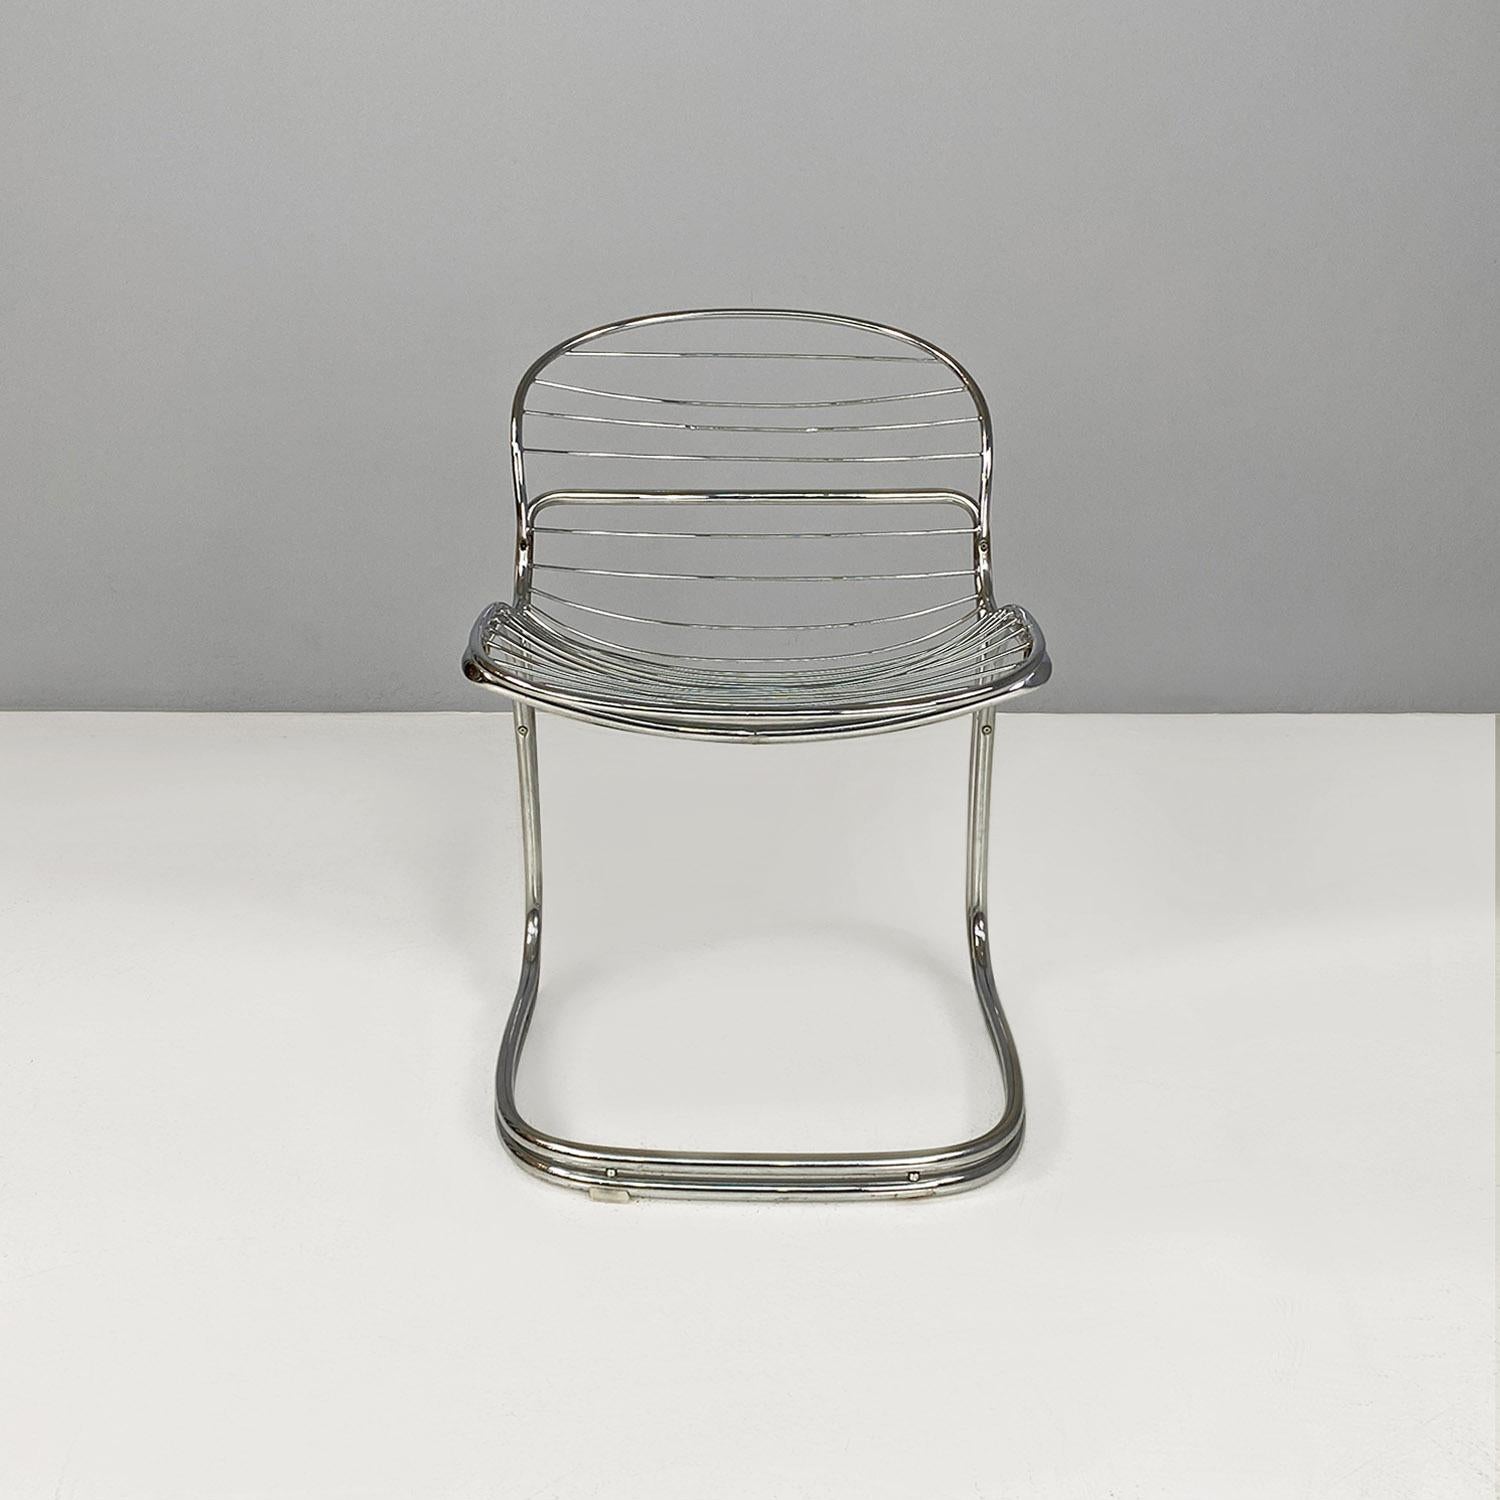 Italian modern chromed steel Sabrina chair by Gastone Rinaldi for Rima, 1970s.
Sabrina model chair, with seat and backrest made entirely of fine chromed steel tubing, which follows the shape of the body.
Produced by Rima in approx. 1970. and